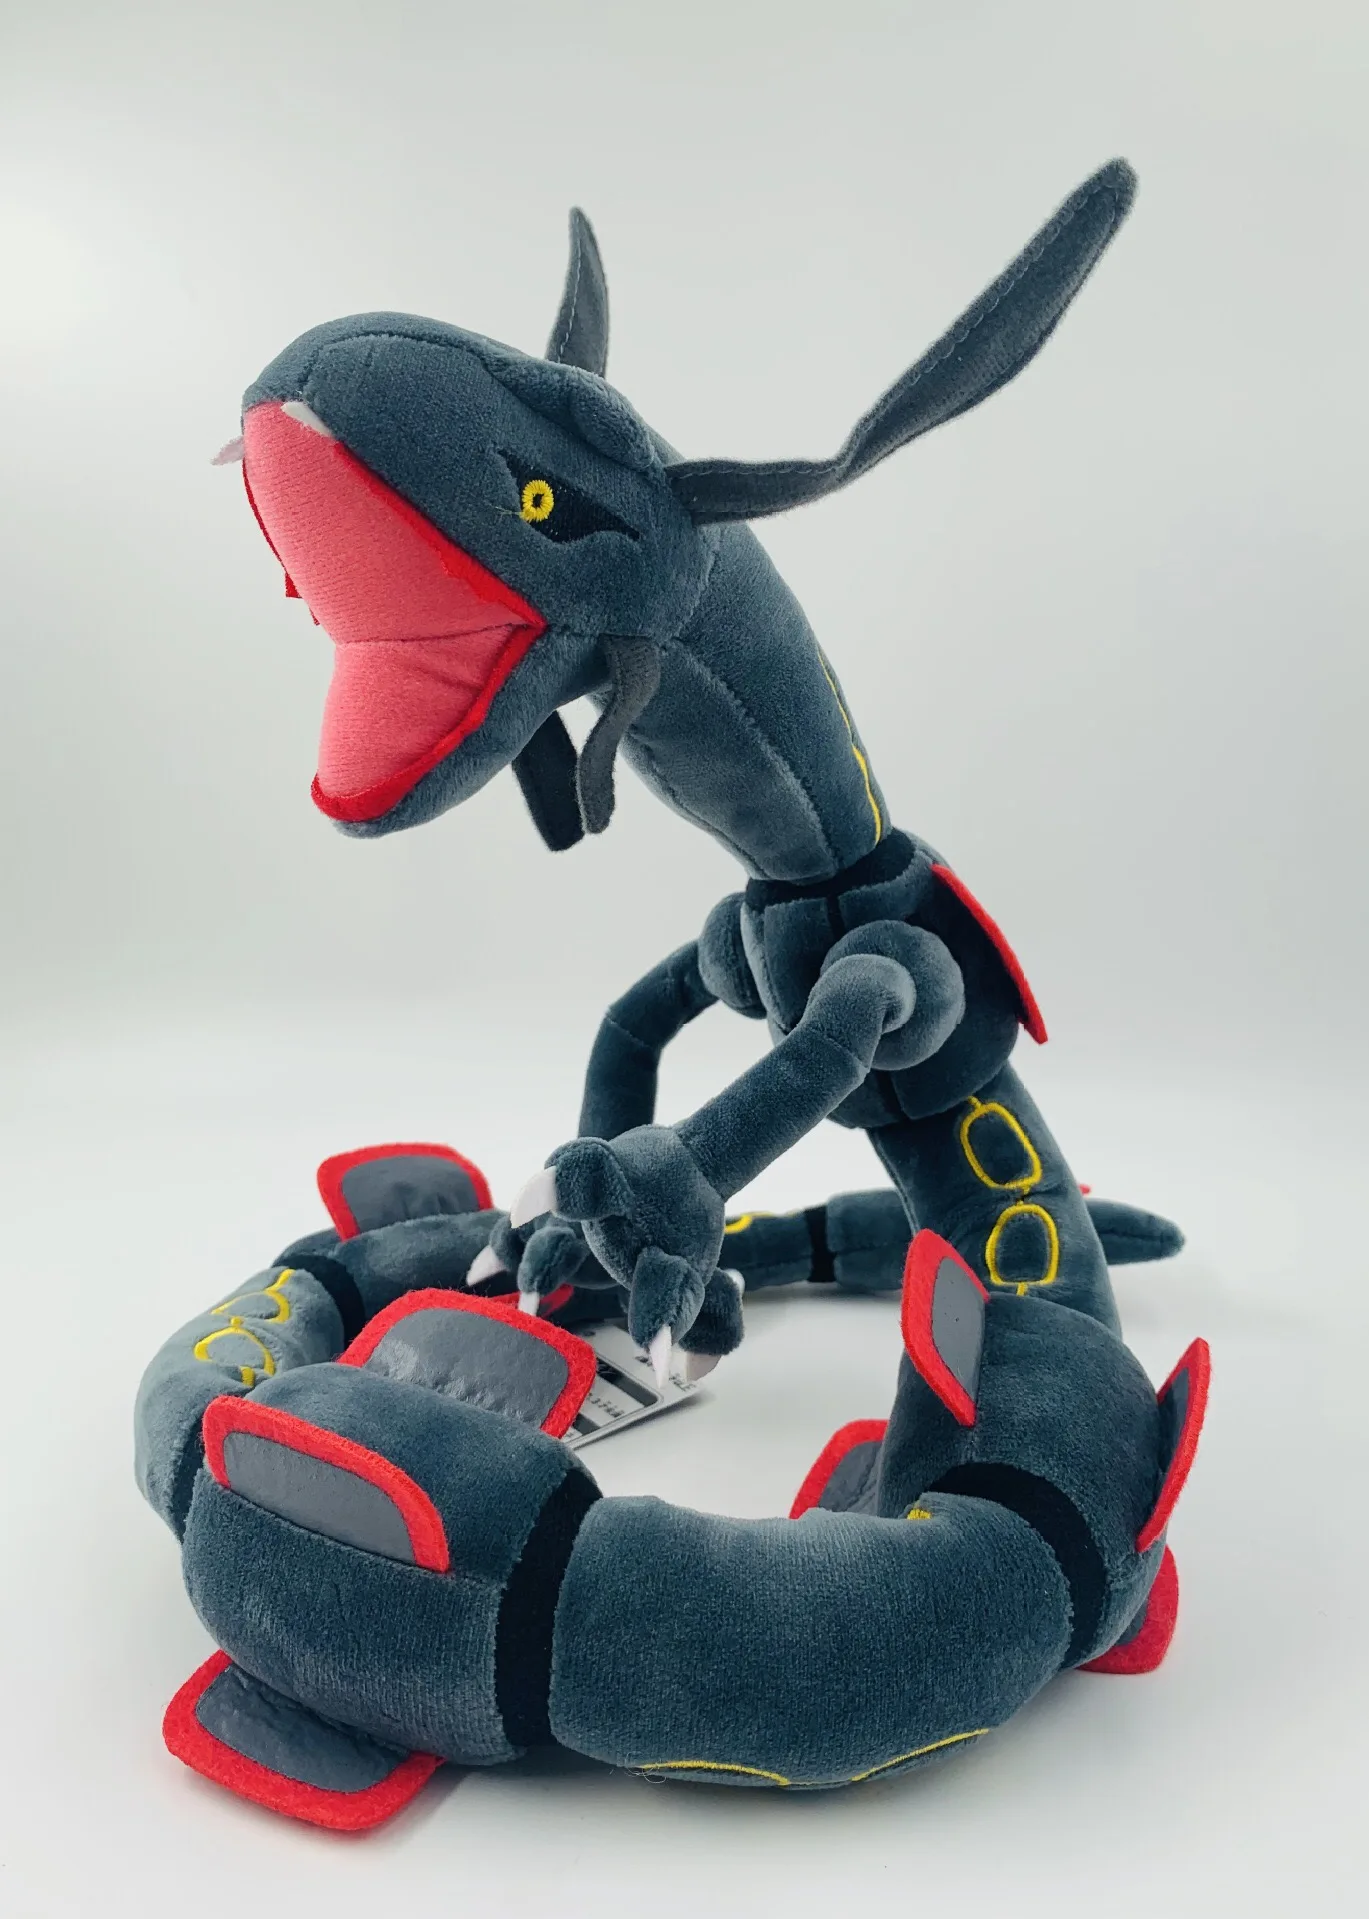 SHINY MEGA RAYQUAZA 31 plush for Sale in Bellflower, CA - OfferUp